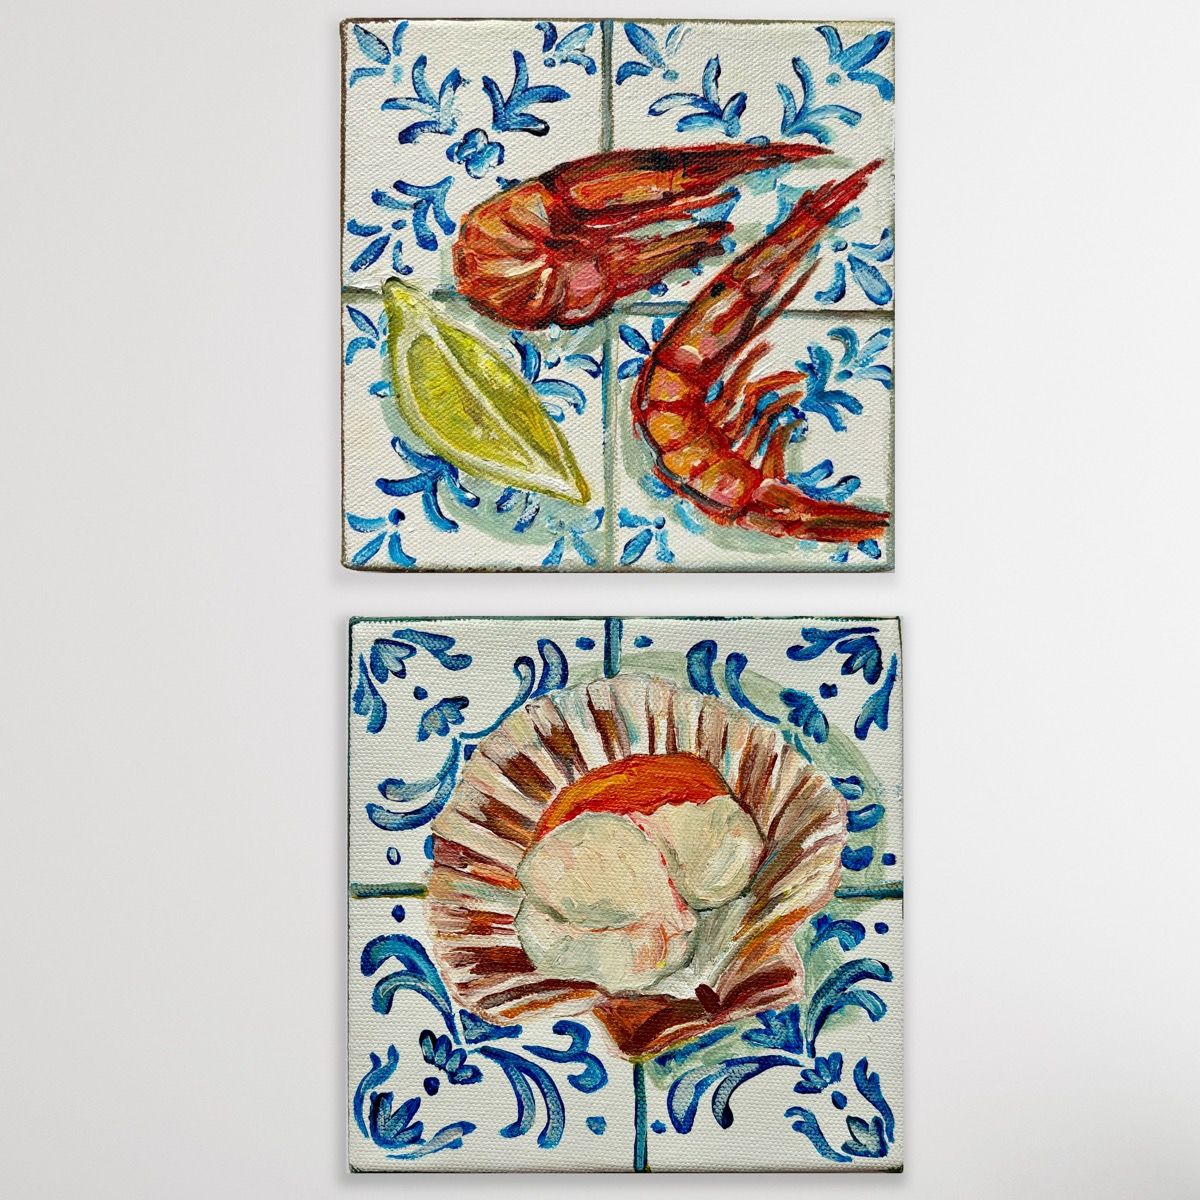 Two Prawns & Lemon Wedge and Scallop on Tiles diptych by Pippa Smith